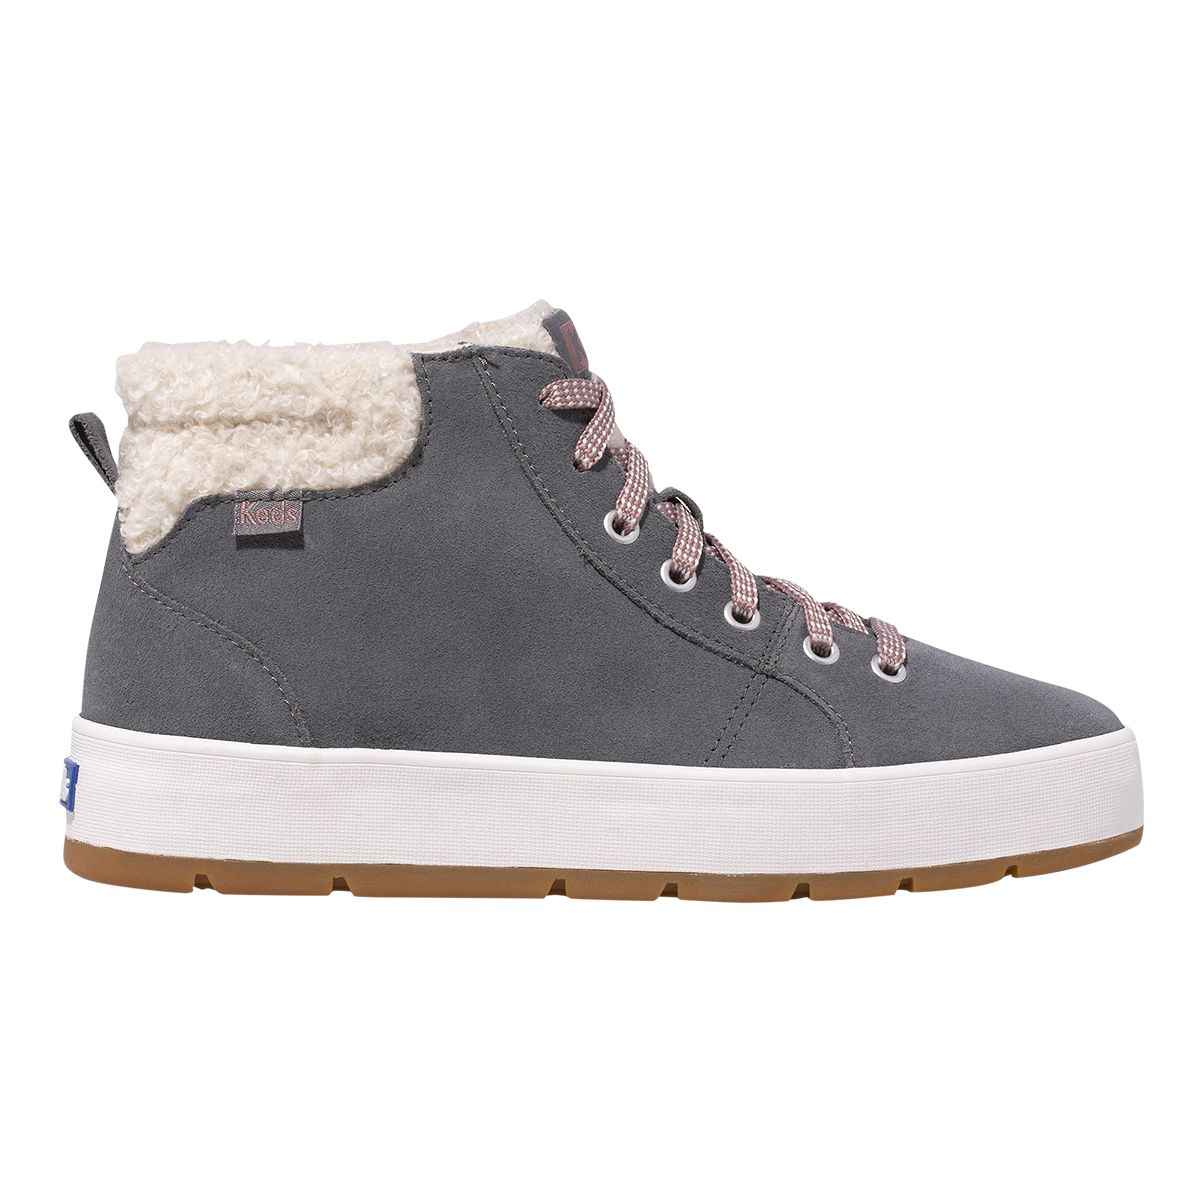 Image of Keds Women's Tahoe Suede Boots